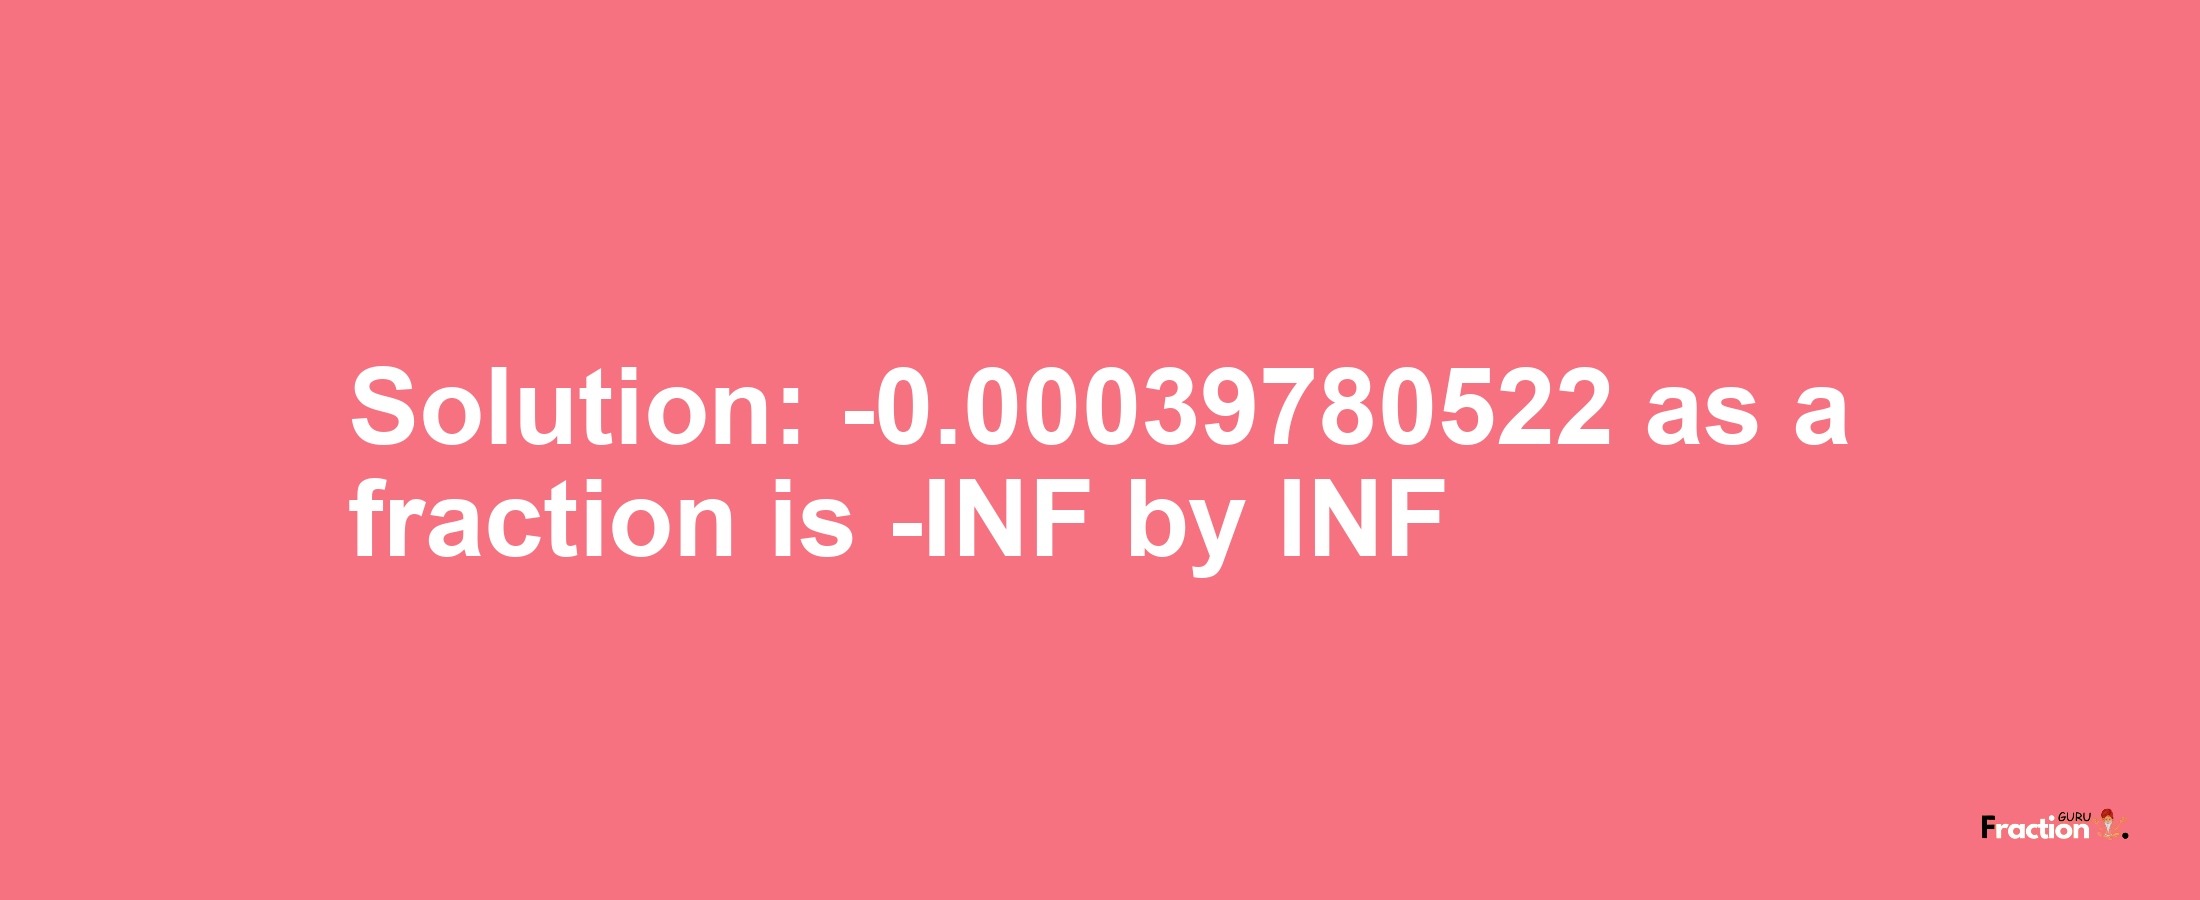 Solution:-0.00039780522 as a fraction is -INF/INF